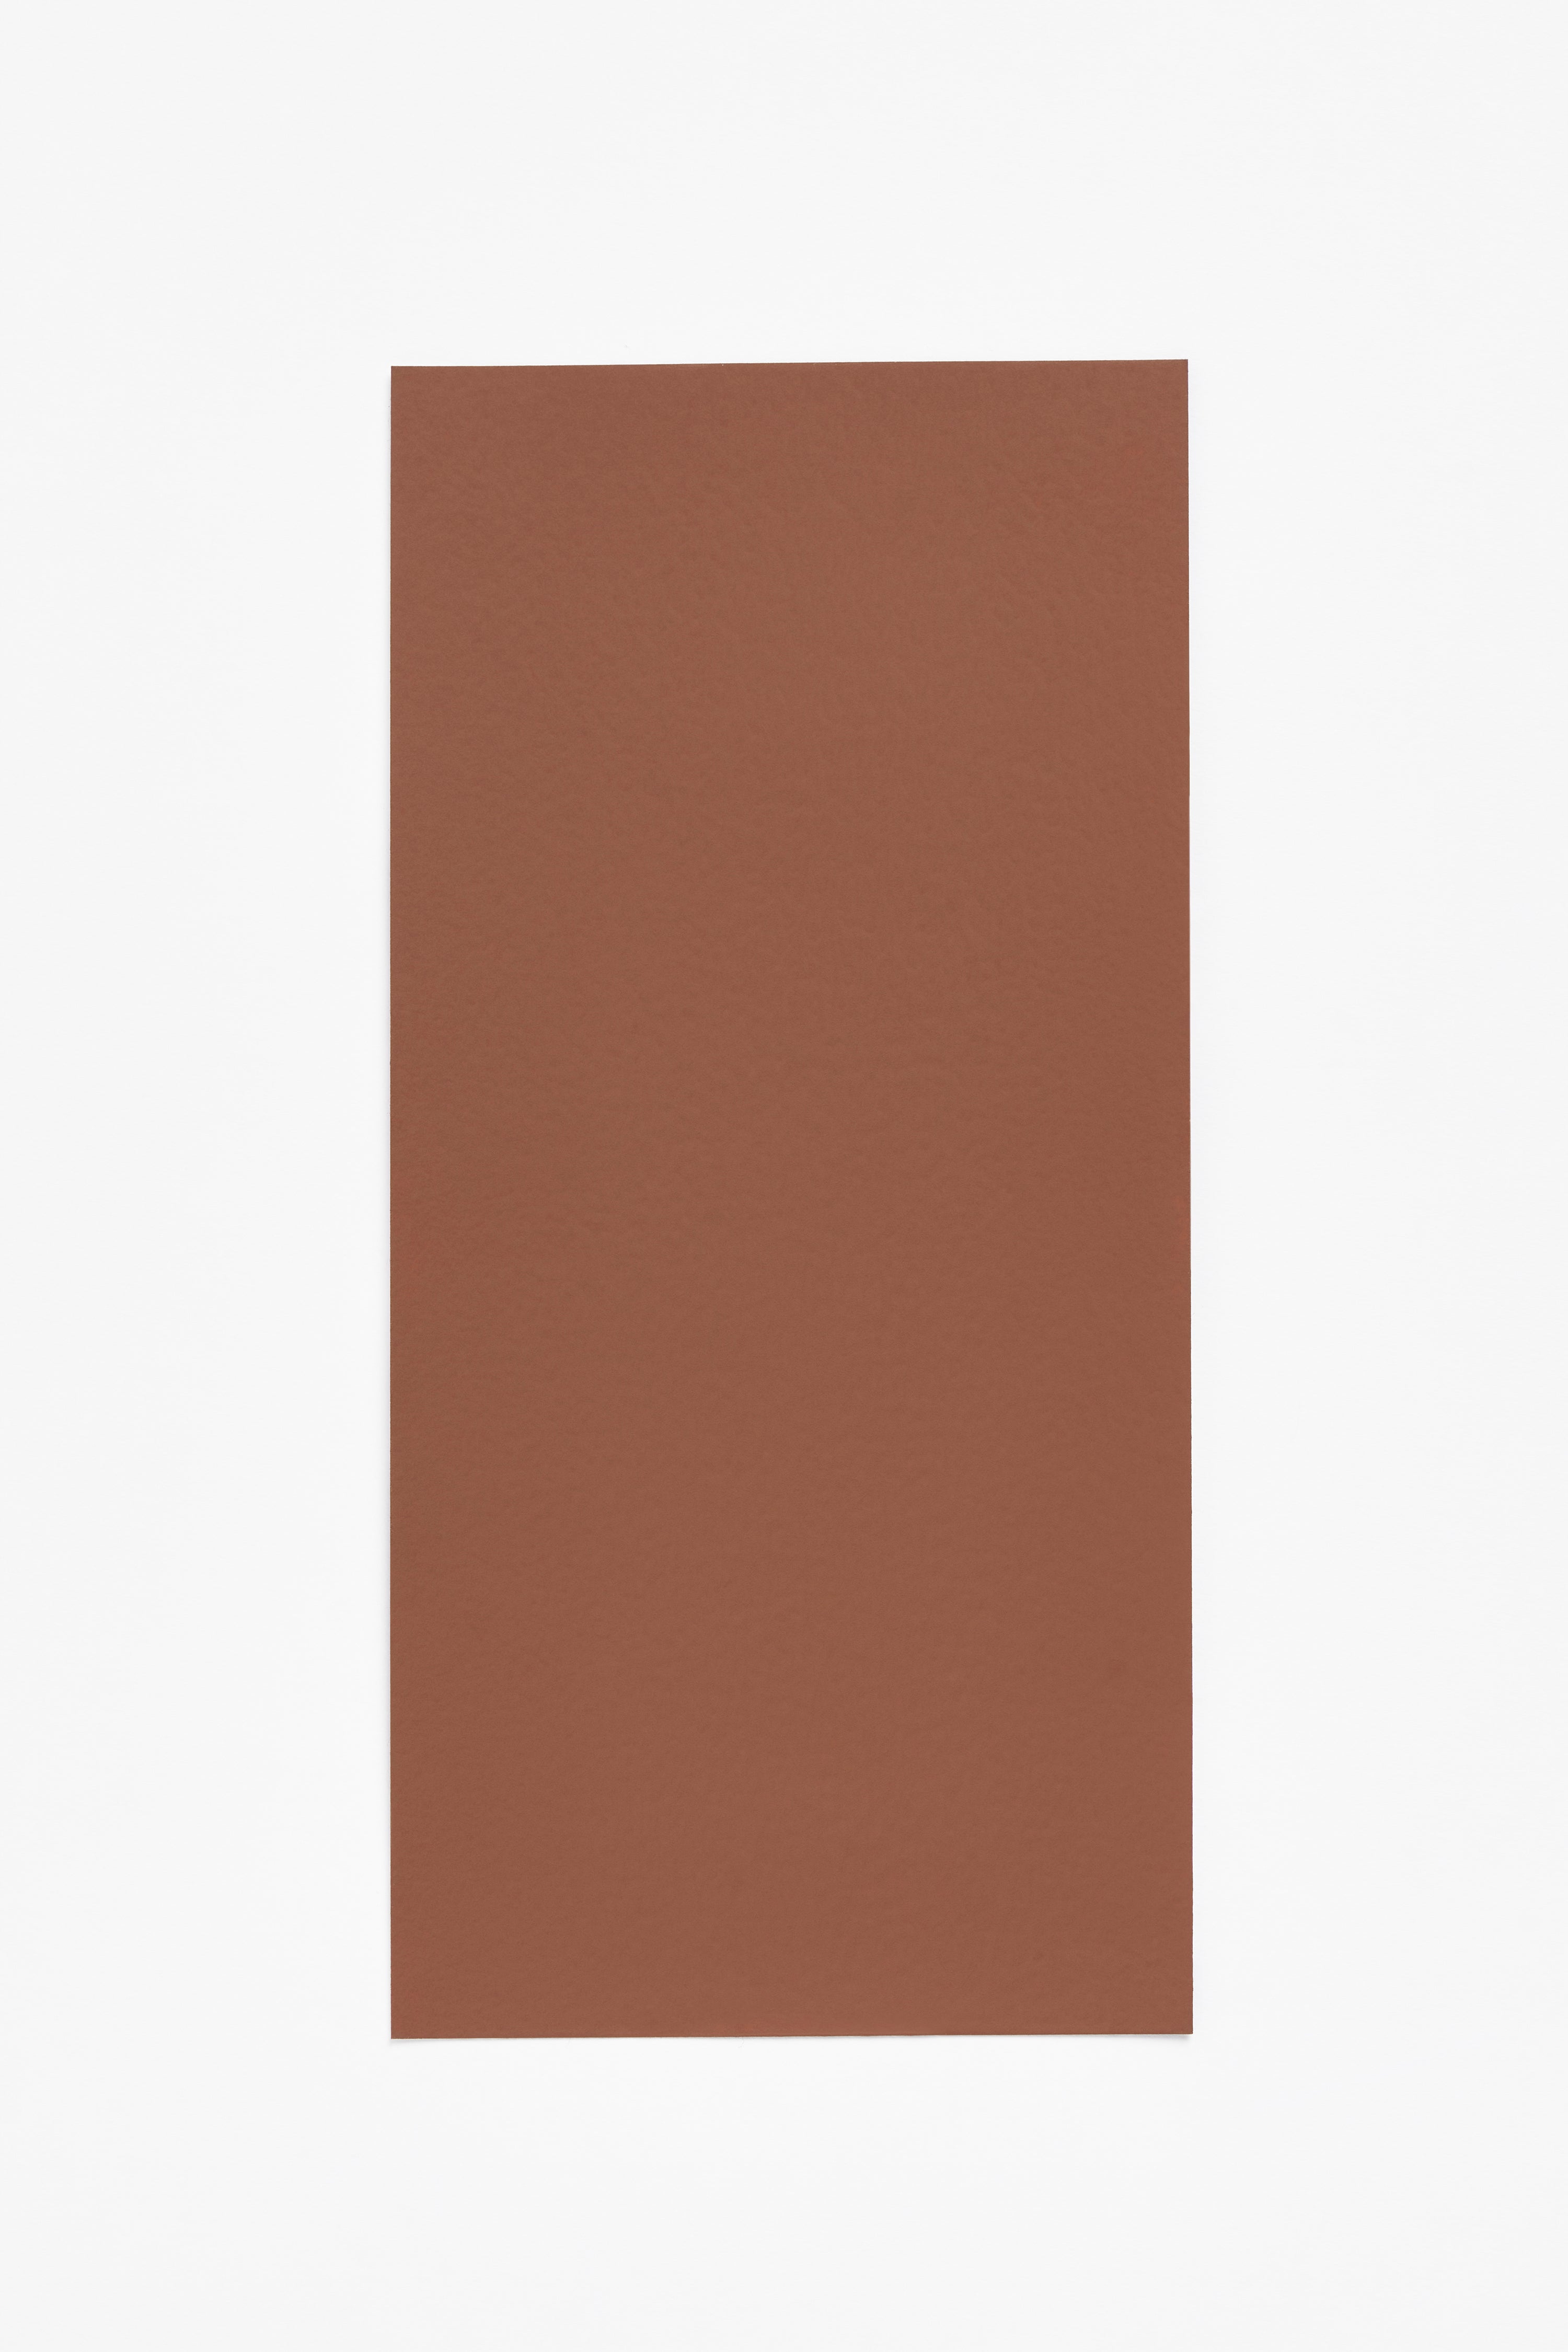 Dark Copper — a paint colour developed by Norm Architects for Blēo